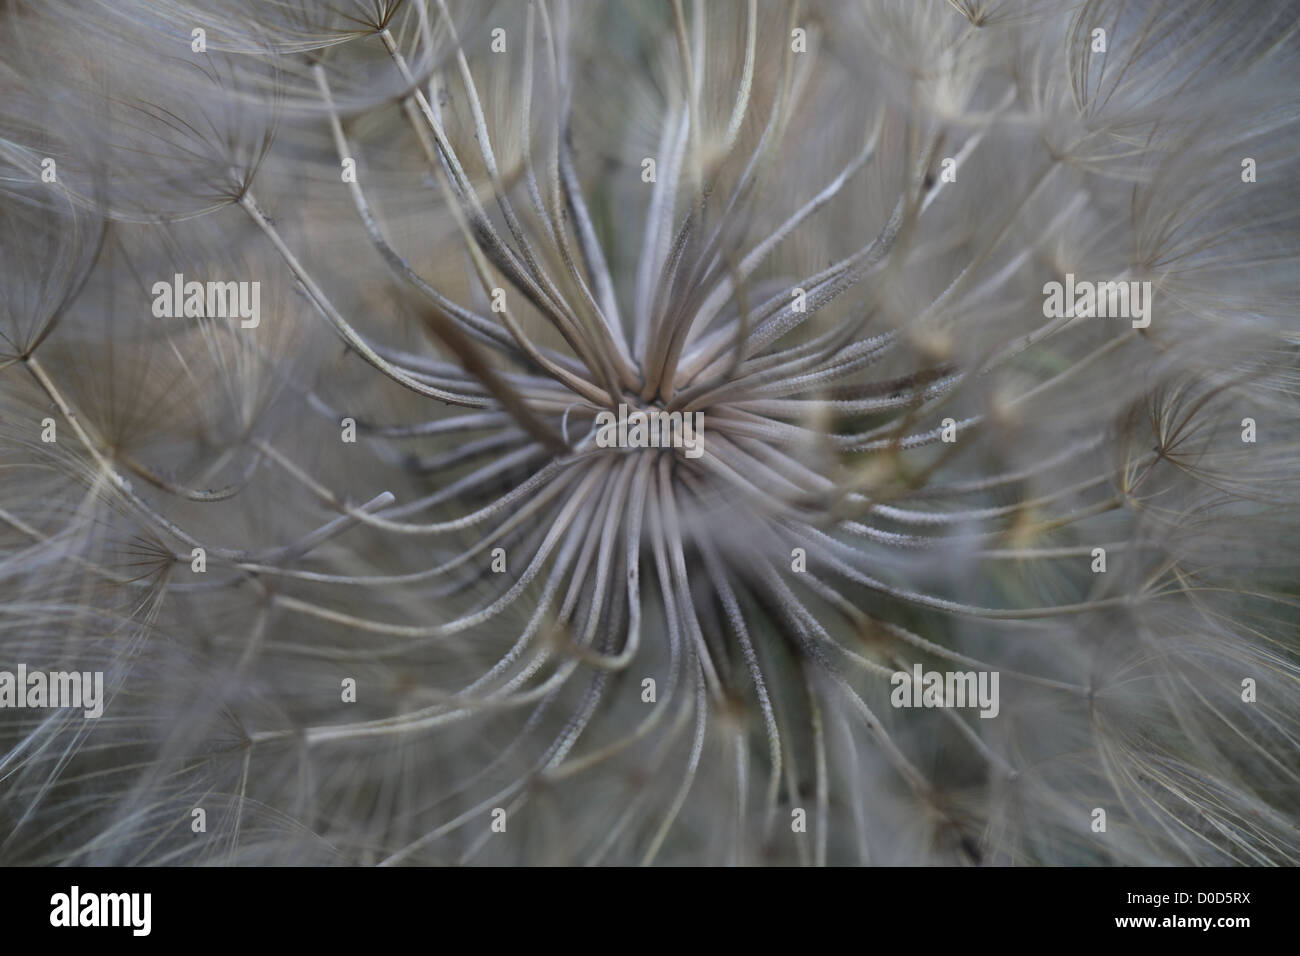 Abstract Image of a Seed Head of a Flower Stock Photo